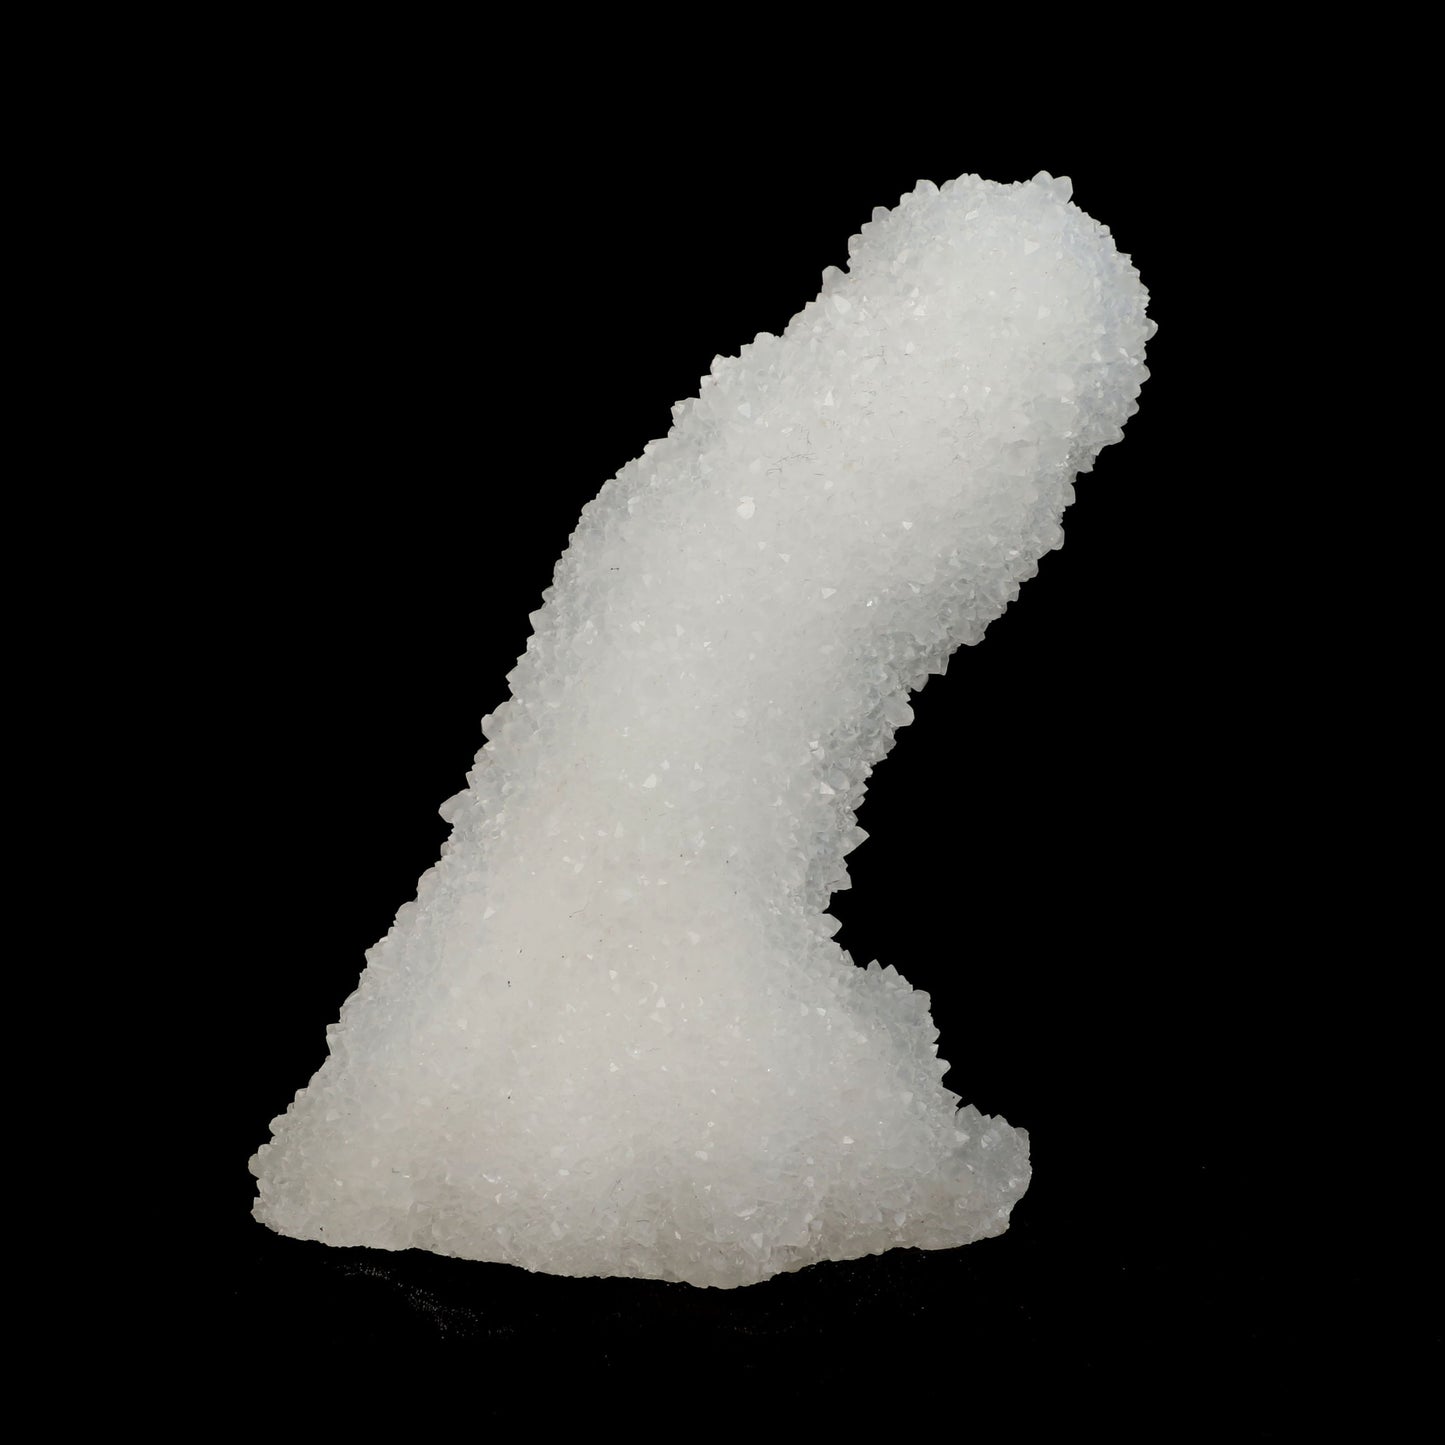 MM Quartz Stalactite Natural Mineral Specimen # B 4938  https://www.superbminerals.us/products/mm-quartz-stalactite-natural-mineral-specimen-b-4938  Features: A very aesthetic specimen of transparent clear&nbsp; Quartz crystals completely covering all sides of a high stalactites as well as two smaller adjoining stalactites, making for great symmetry. A beautiful showy piece in excellent condition. Primary Mineral(s): MM QuartzSecondary